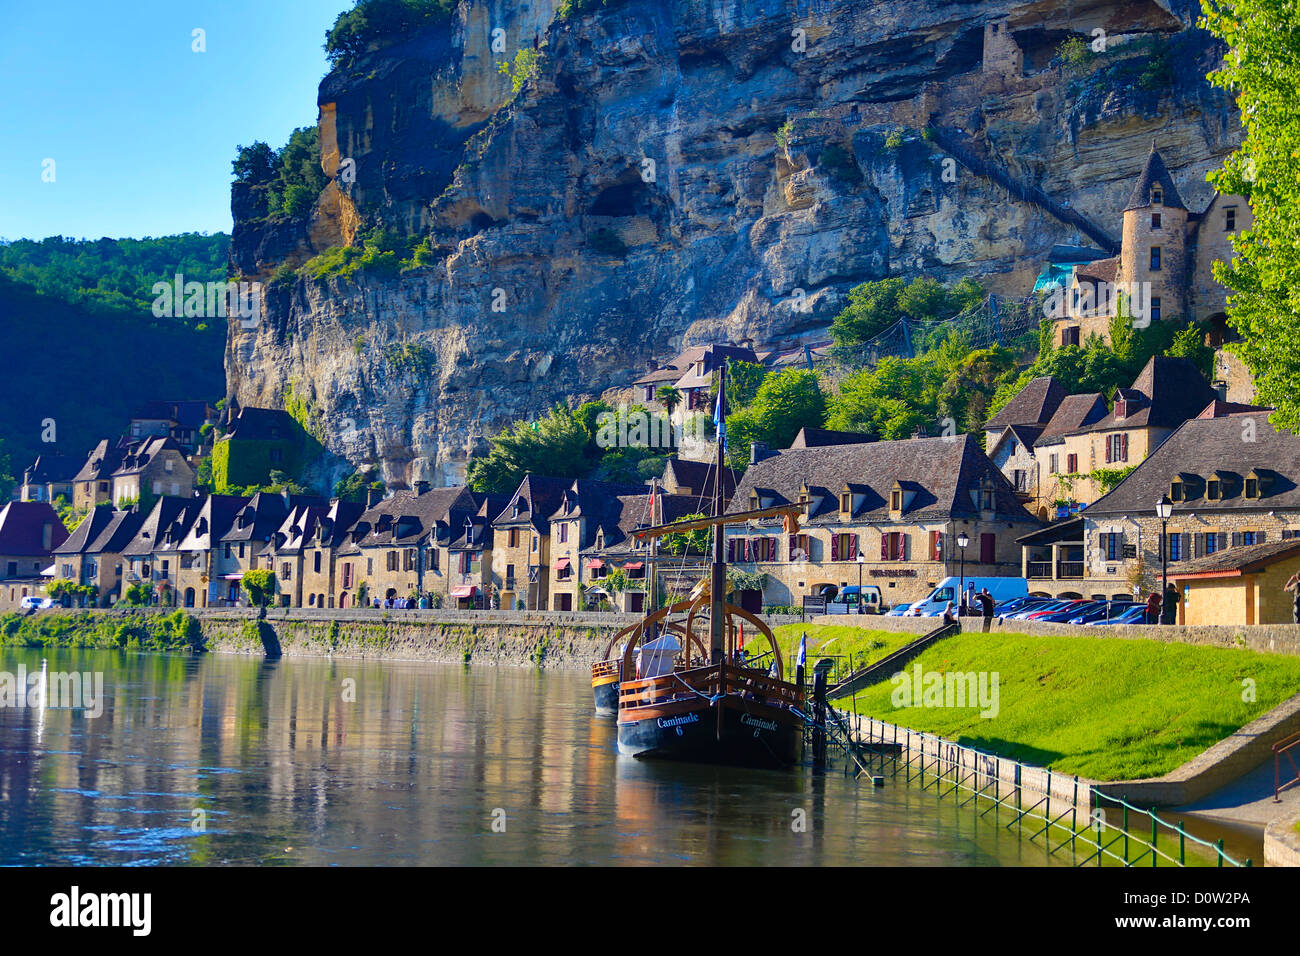 France, Europe, travel, Dordogne, La Roque Gageac, River, architecture, medieval, reflection, traditional, valley, village, boat Stock Photo